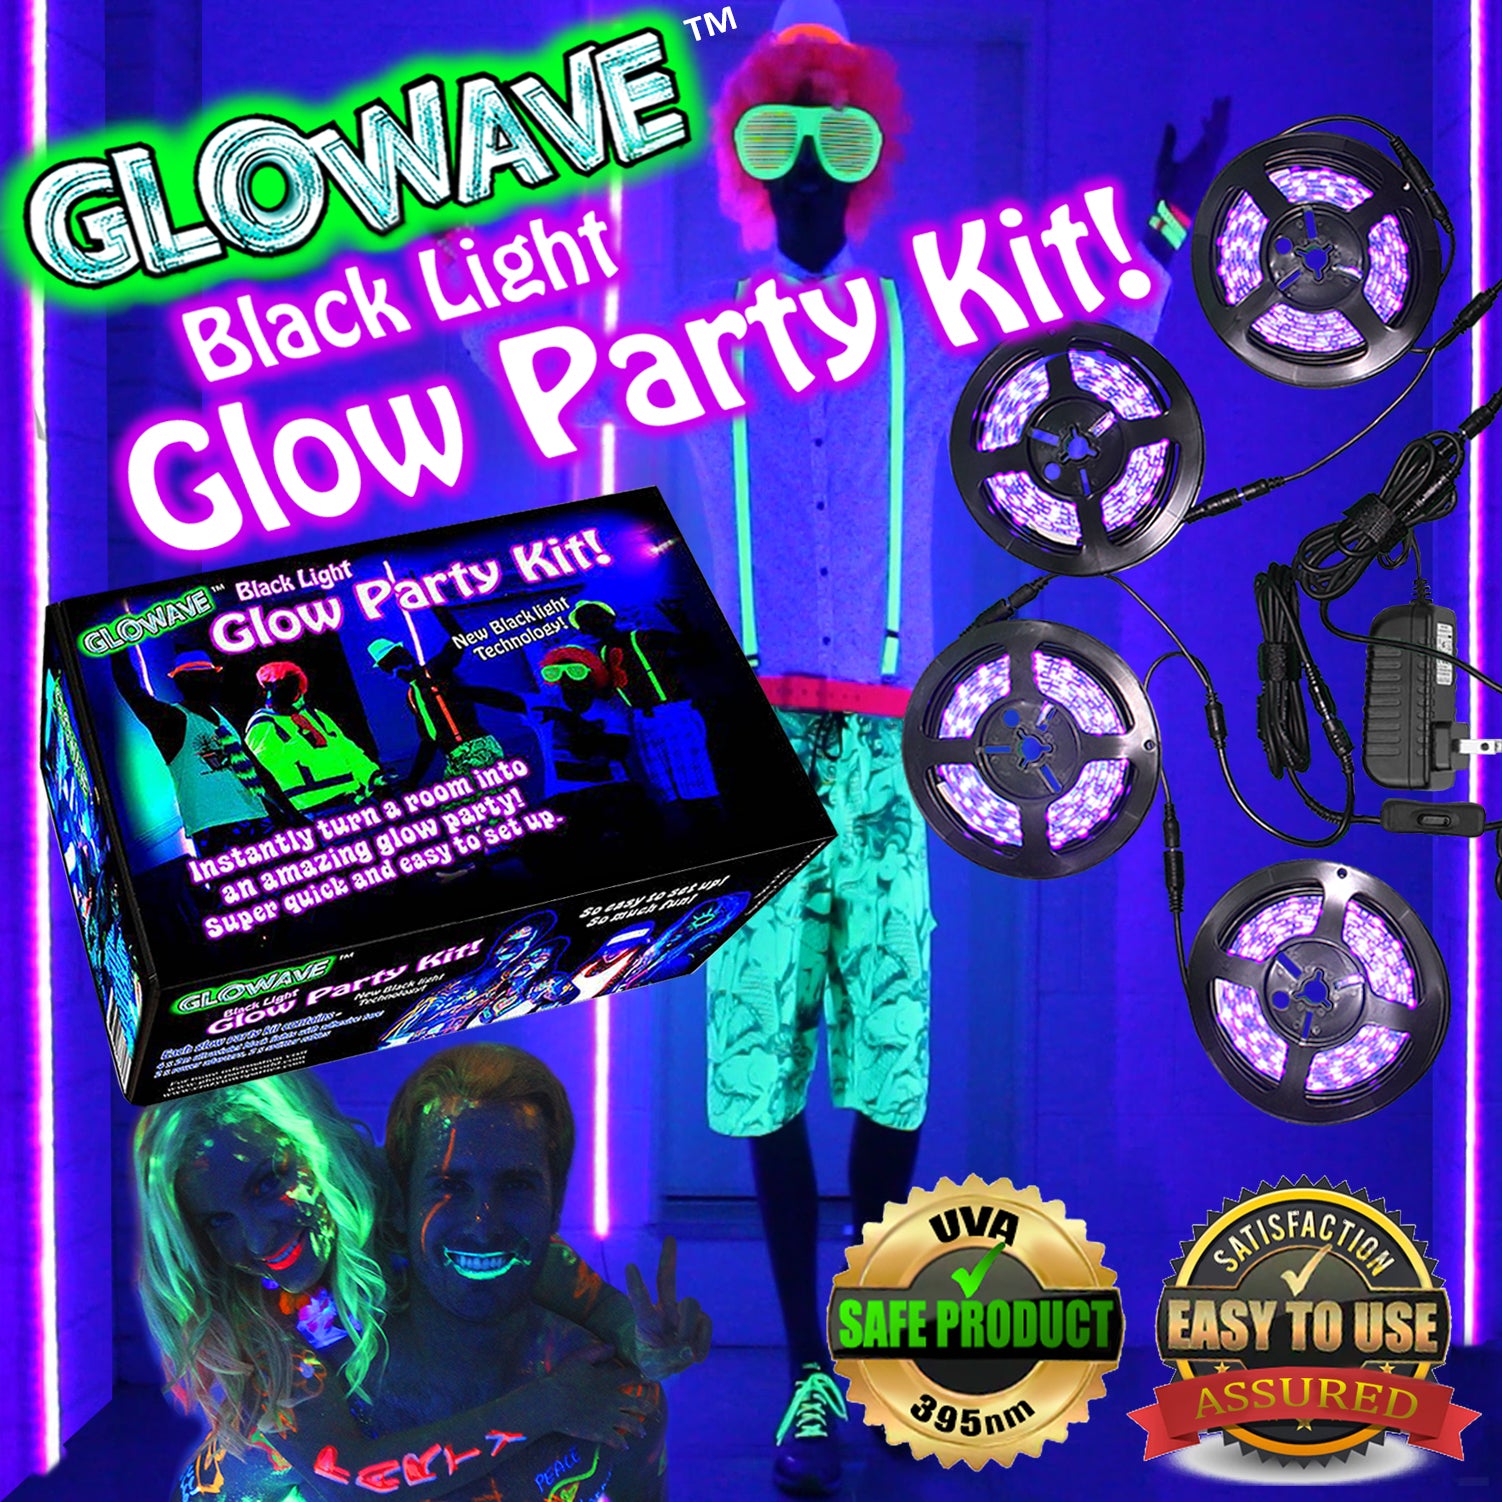 Neon Party - The Complete Party Guide - Black light LED glow party